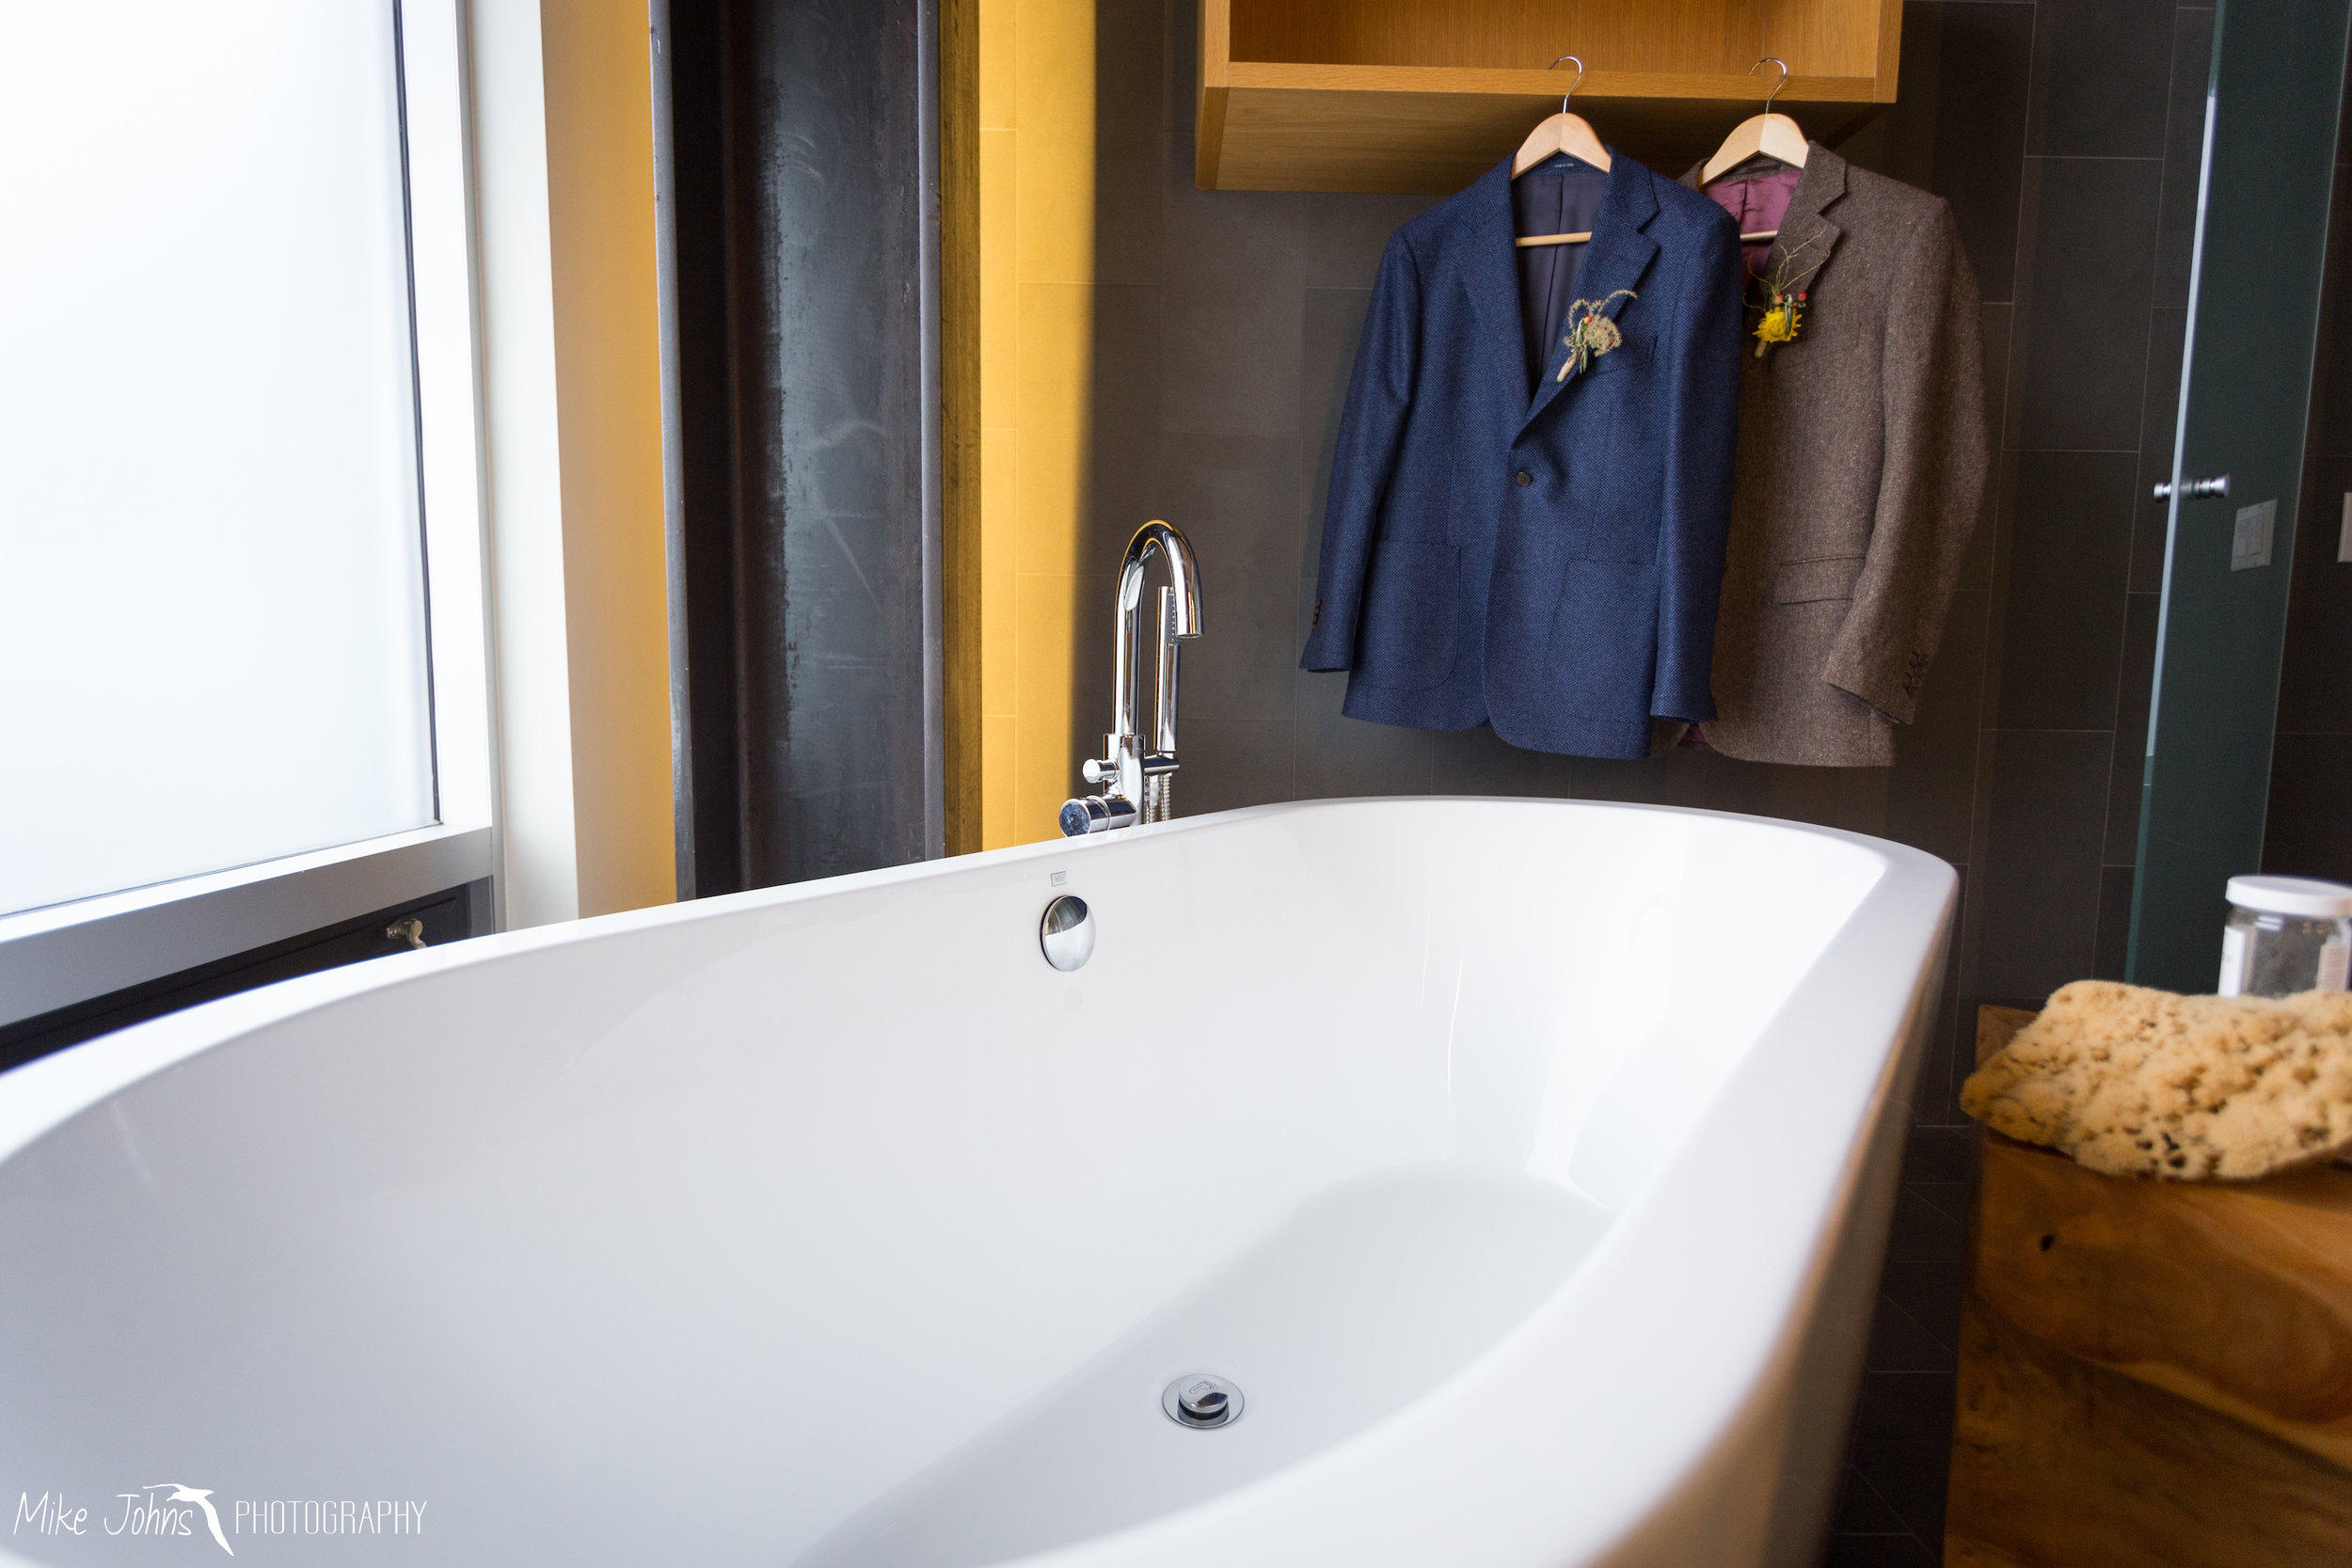  Our penthouse above the venue featured this amazing tub, which was used pre and post wedding.&nbsp; 